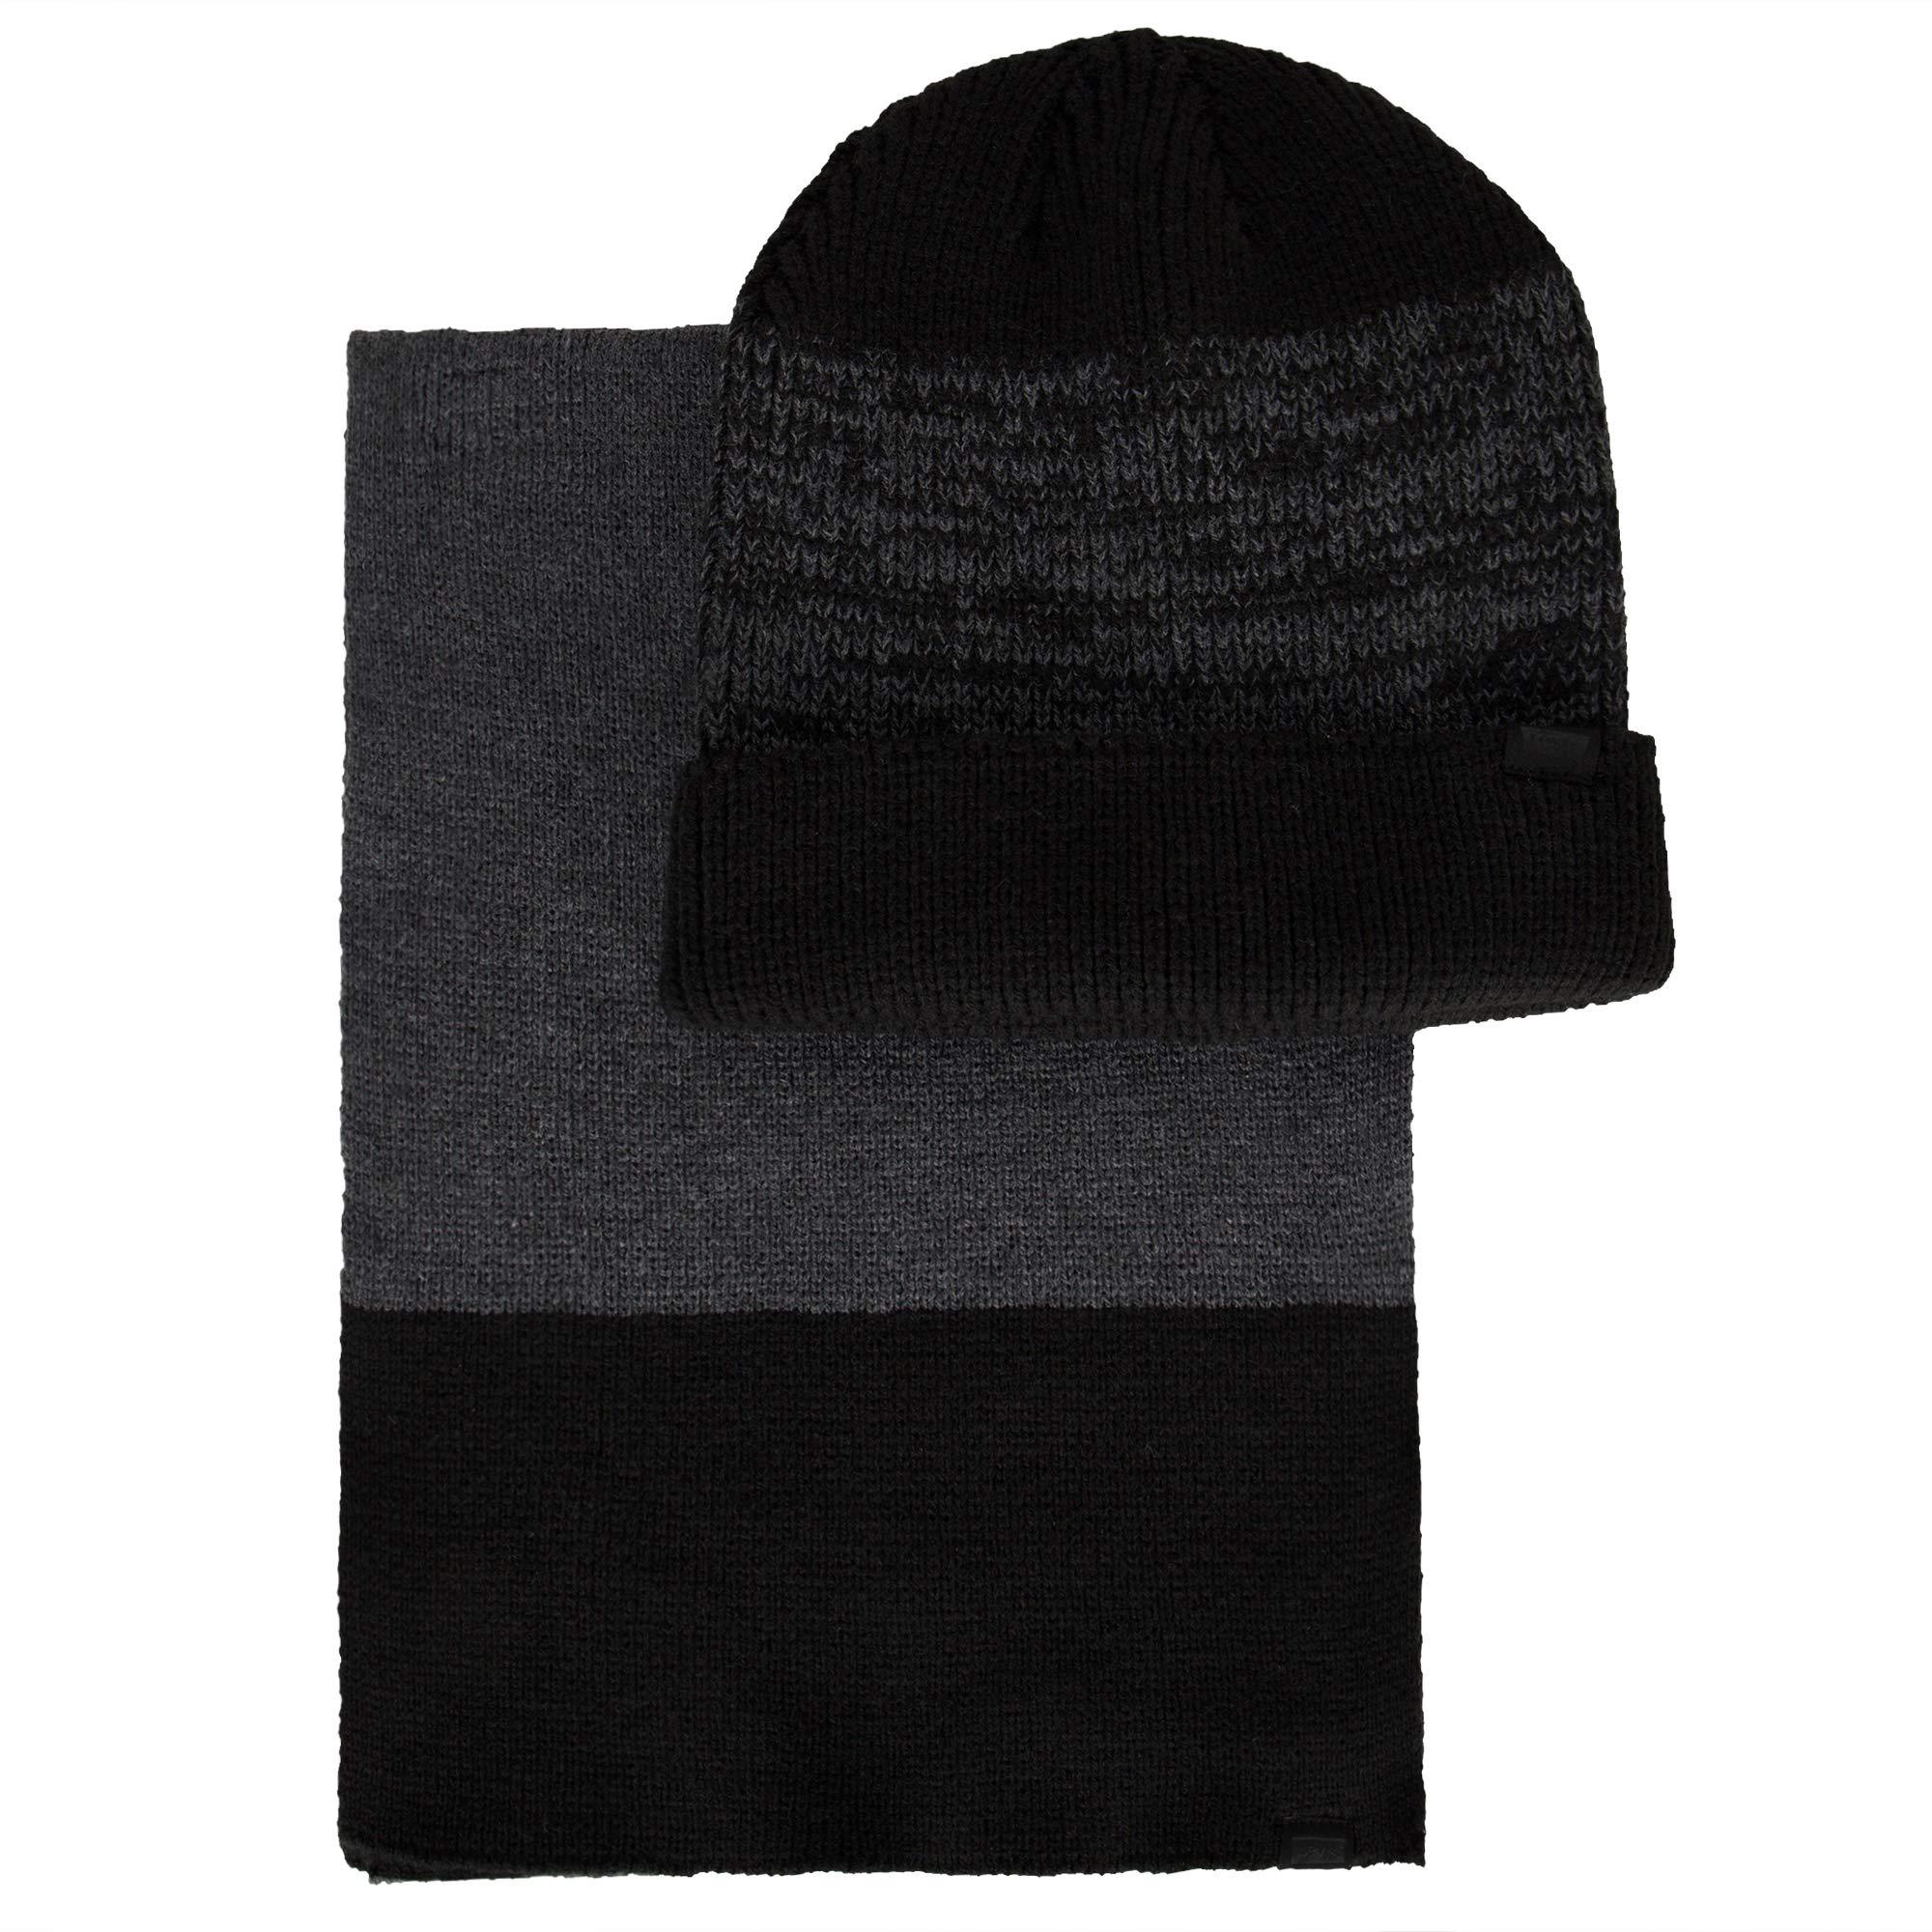 levi's hat and scarf